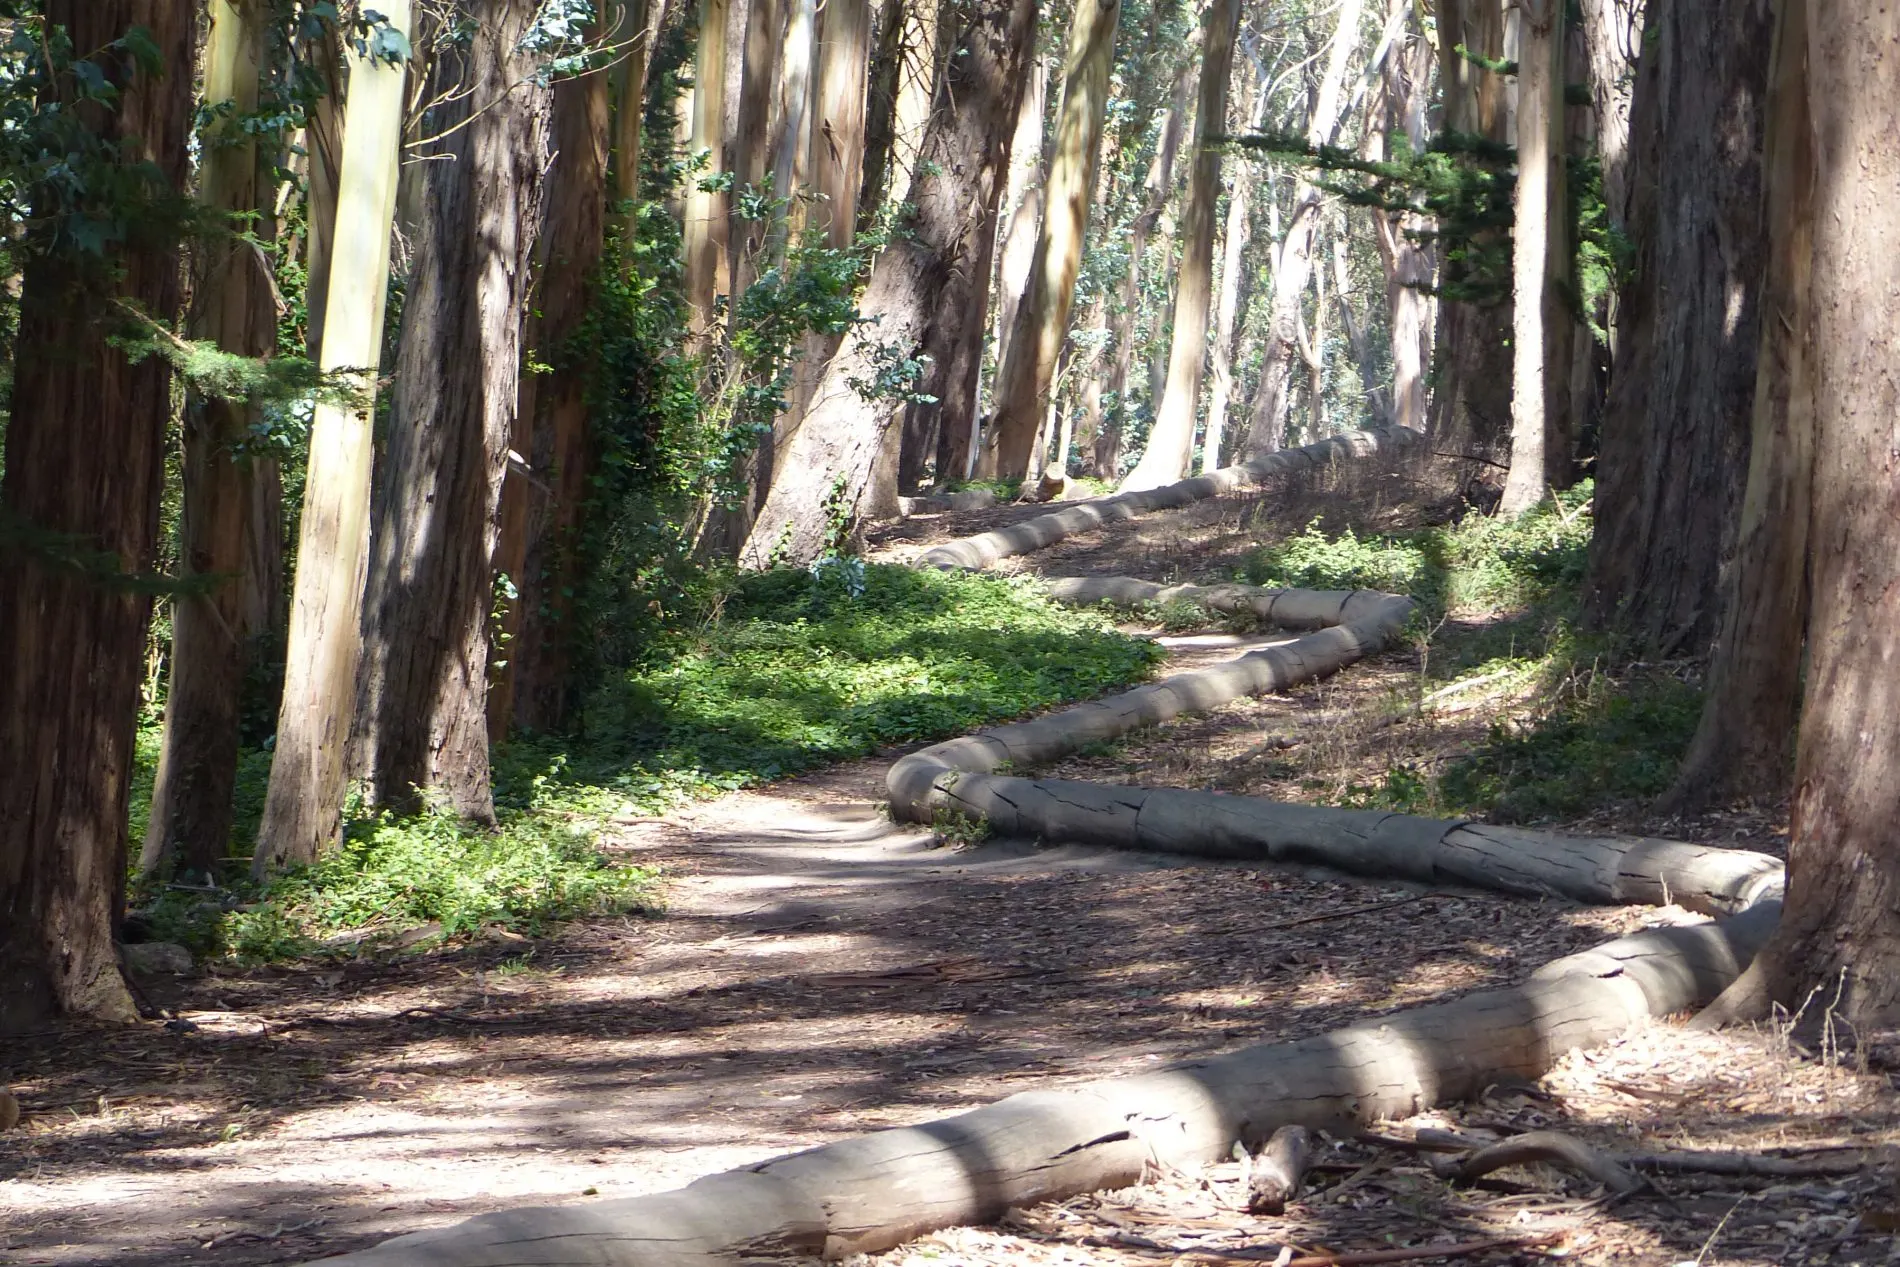 Wood Line is a sculpture of logs set in a zigzag pattern forming a serene 1,200-foot path through a eucalyptus grove.